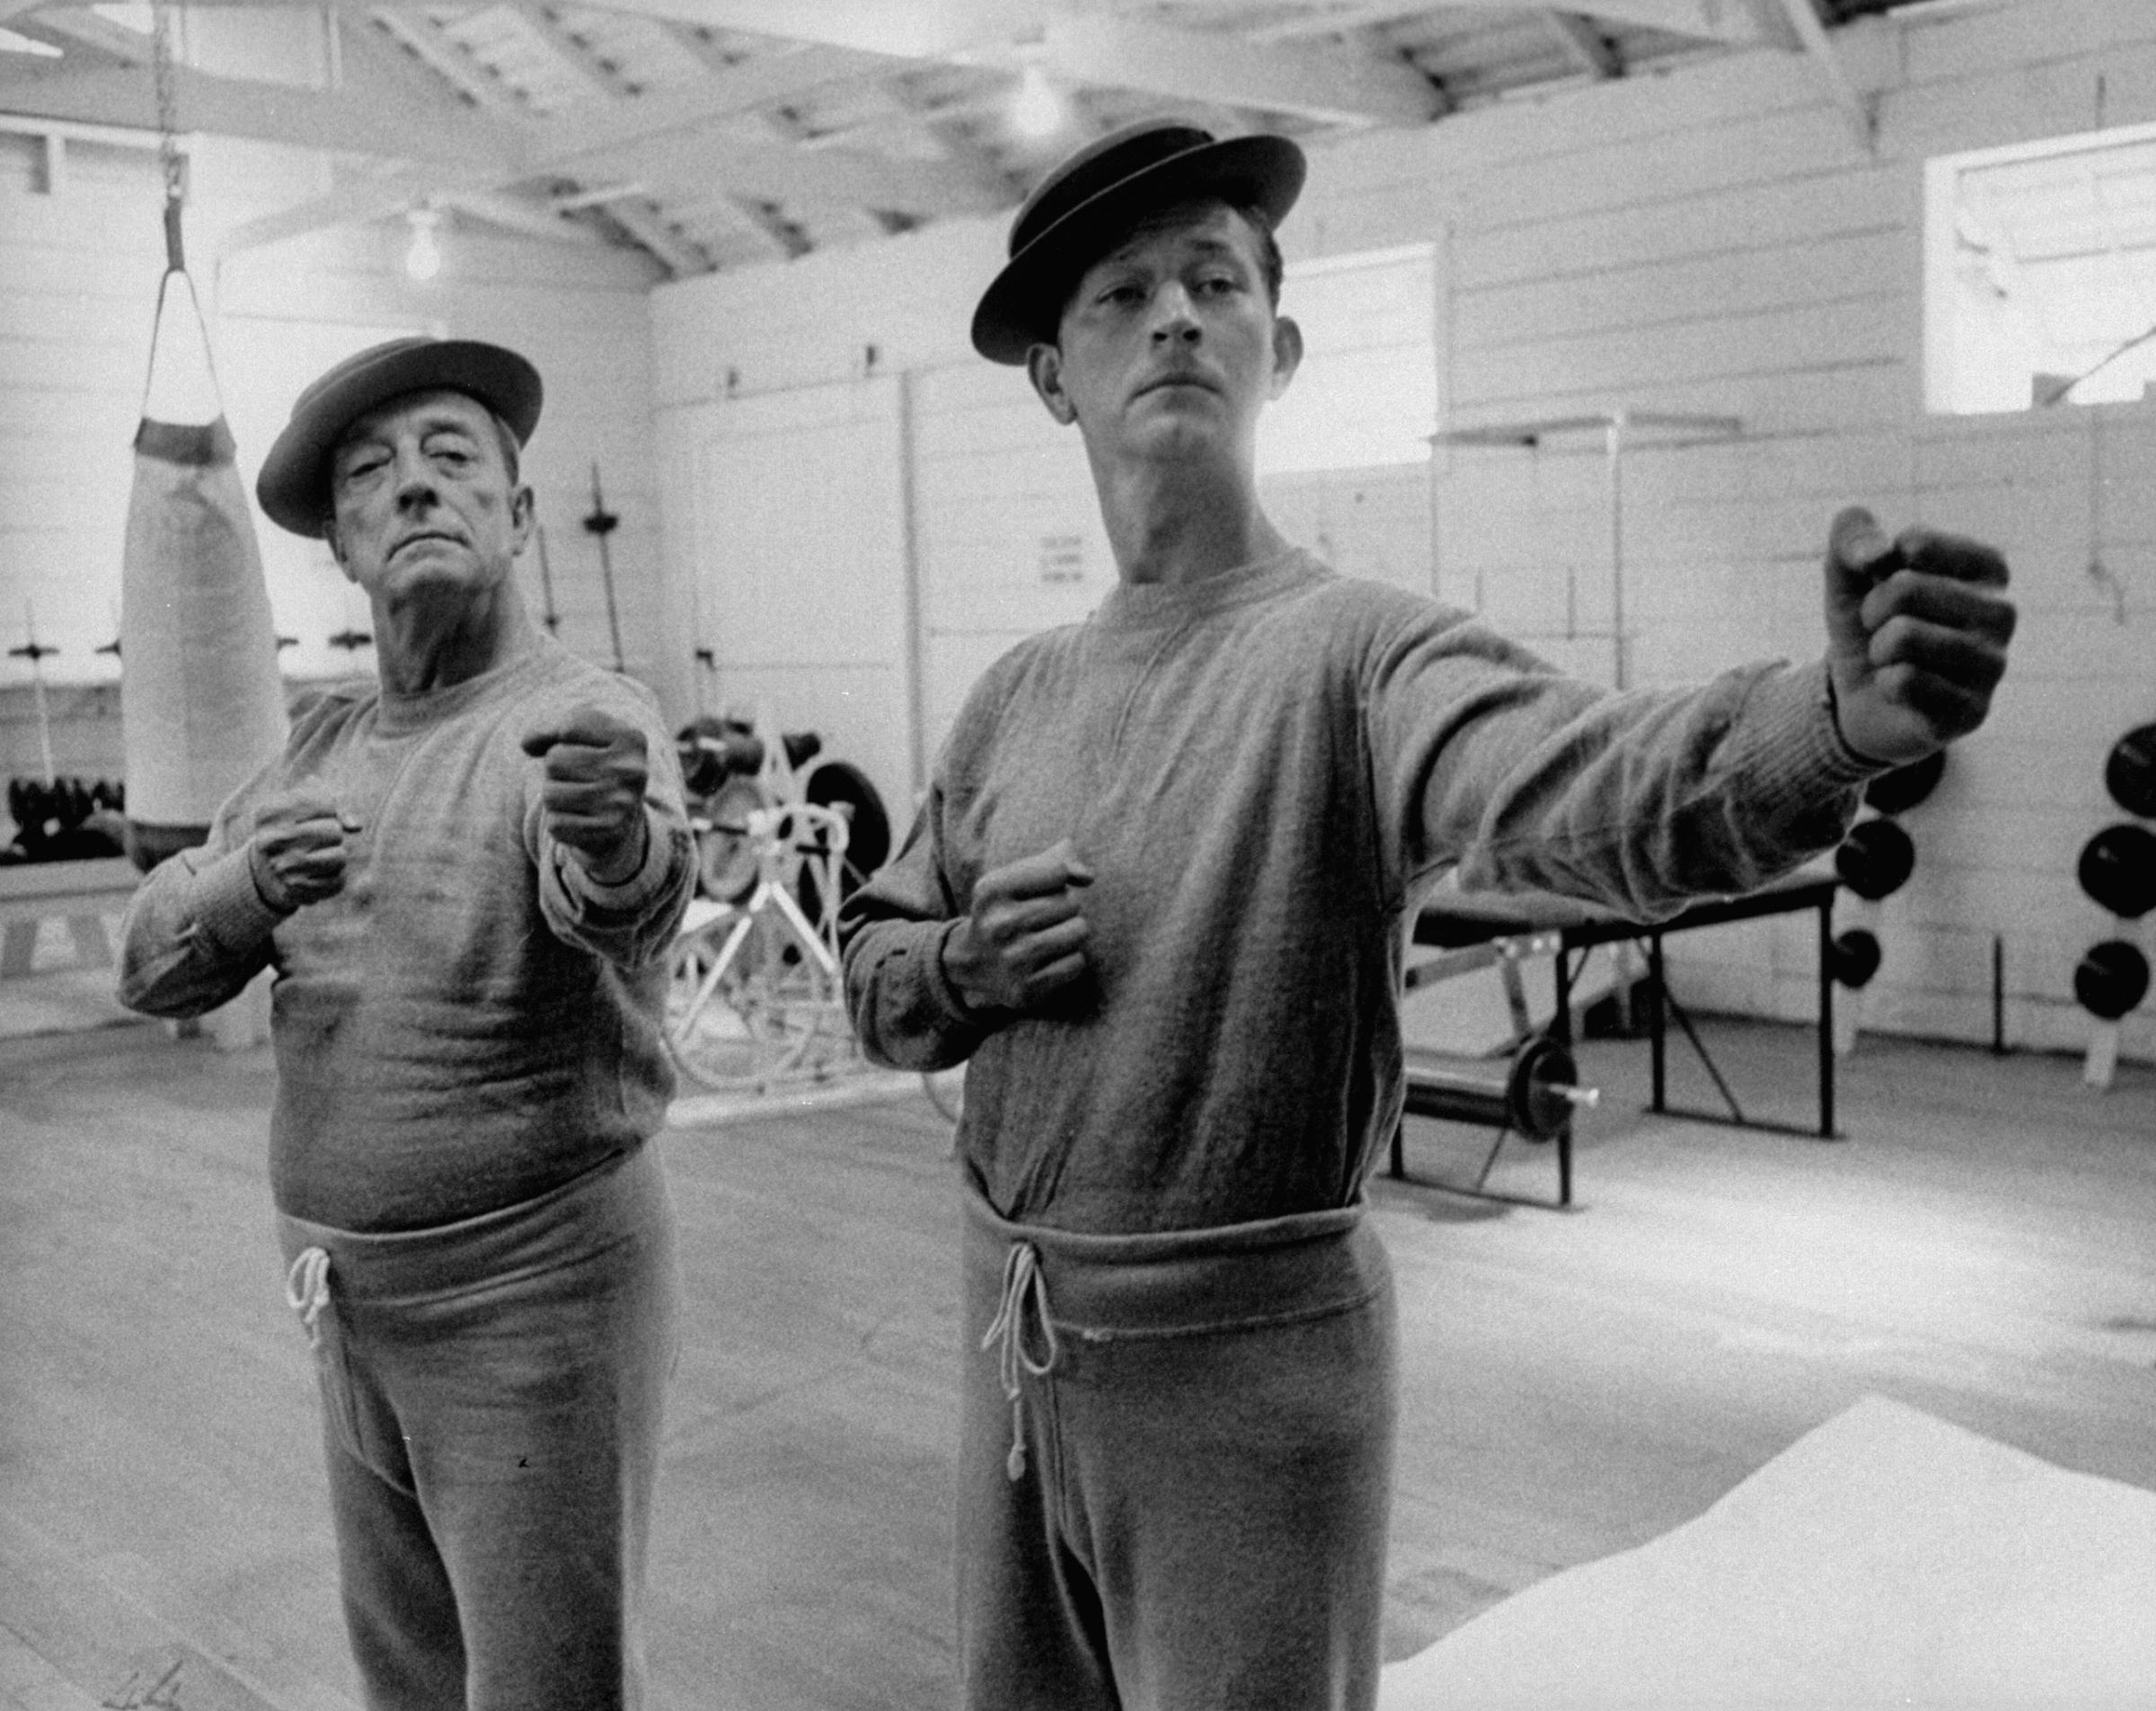 Buster Keaton and Donald O'Connor rehearse for a movie based on Keaton's life, 1956.